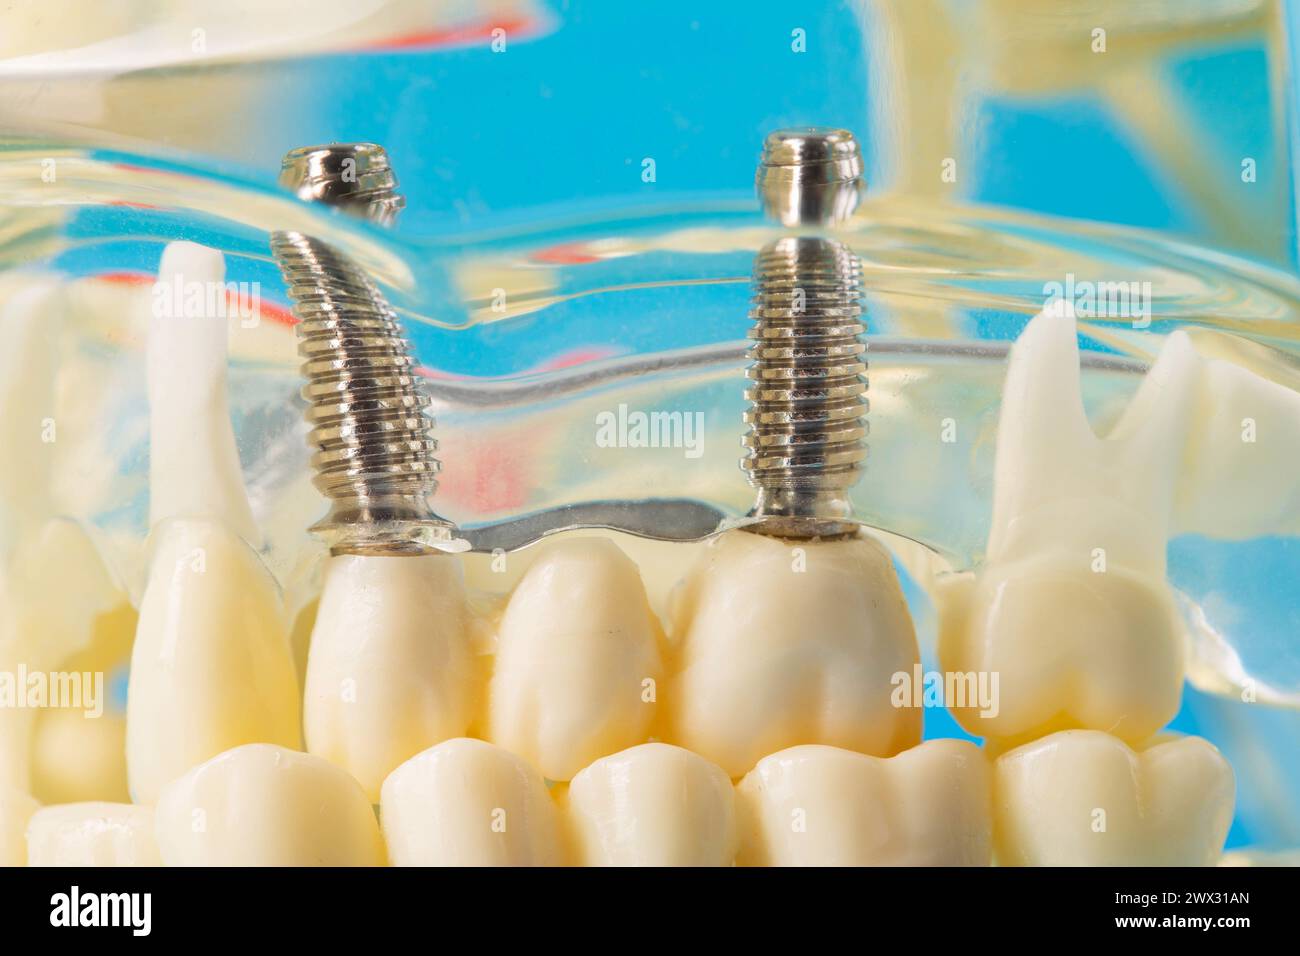 Medical model of a patient's dental jaw with pins in the gums and dental implants. Unerupted wisdom teeth, close-up. Restoration Stock Photo